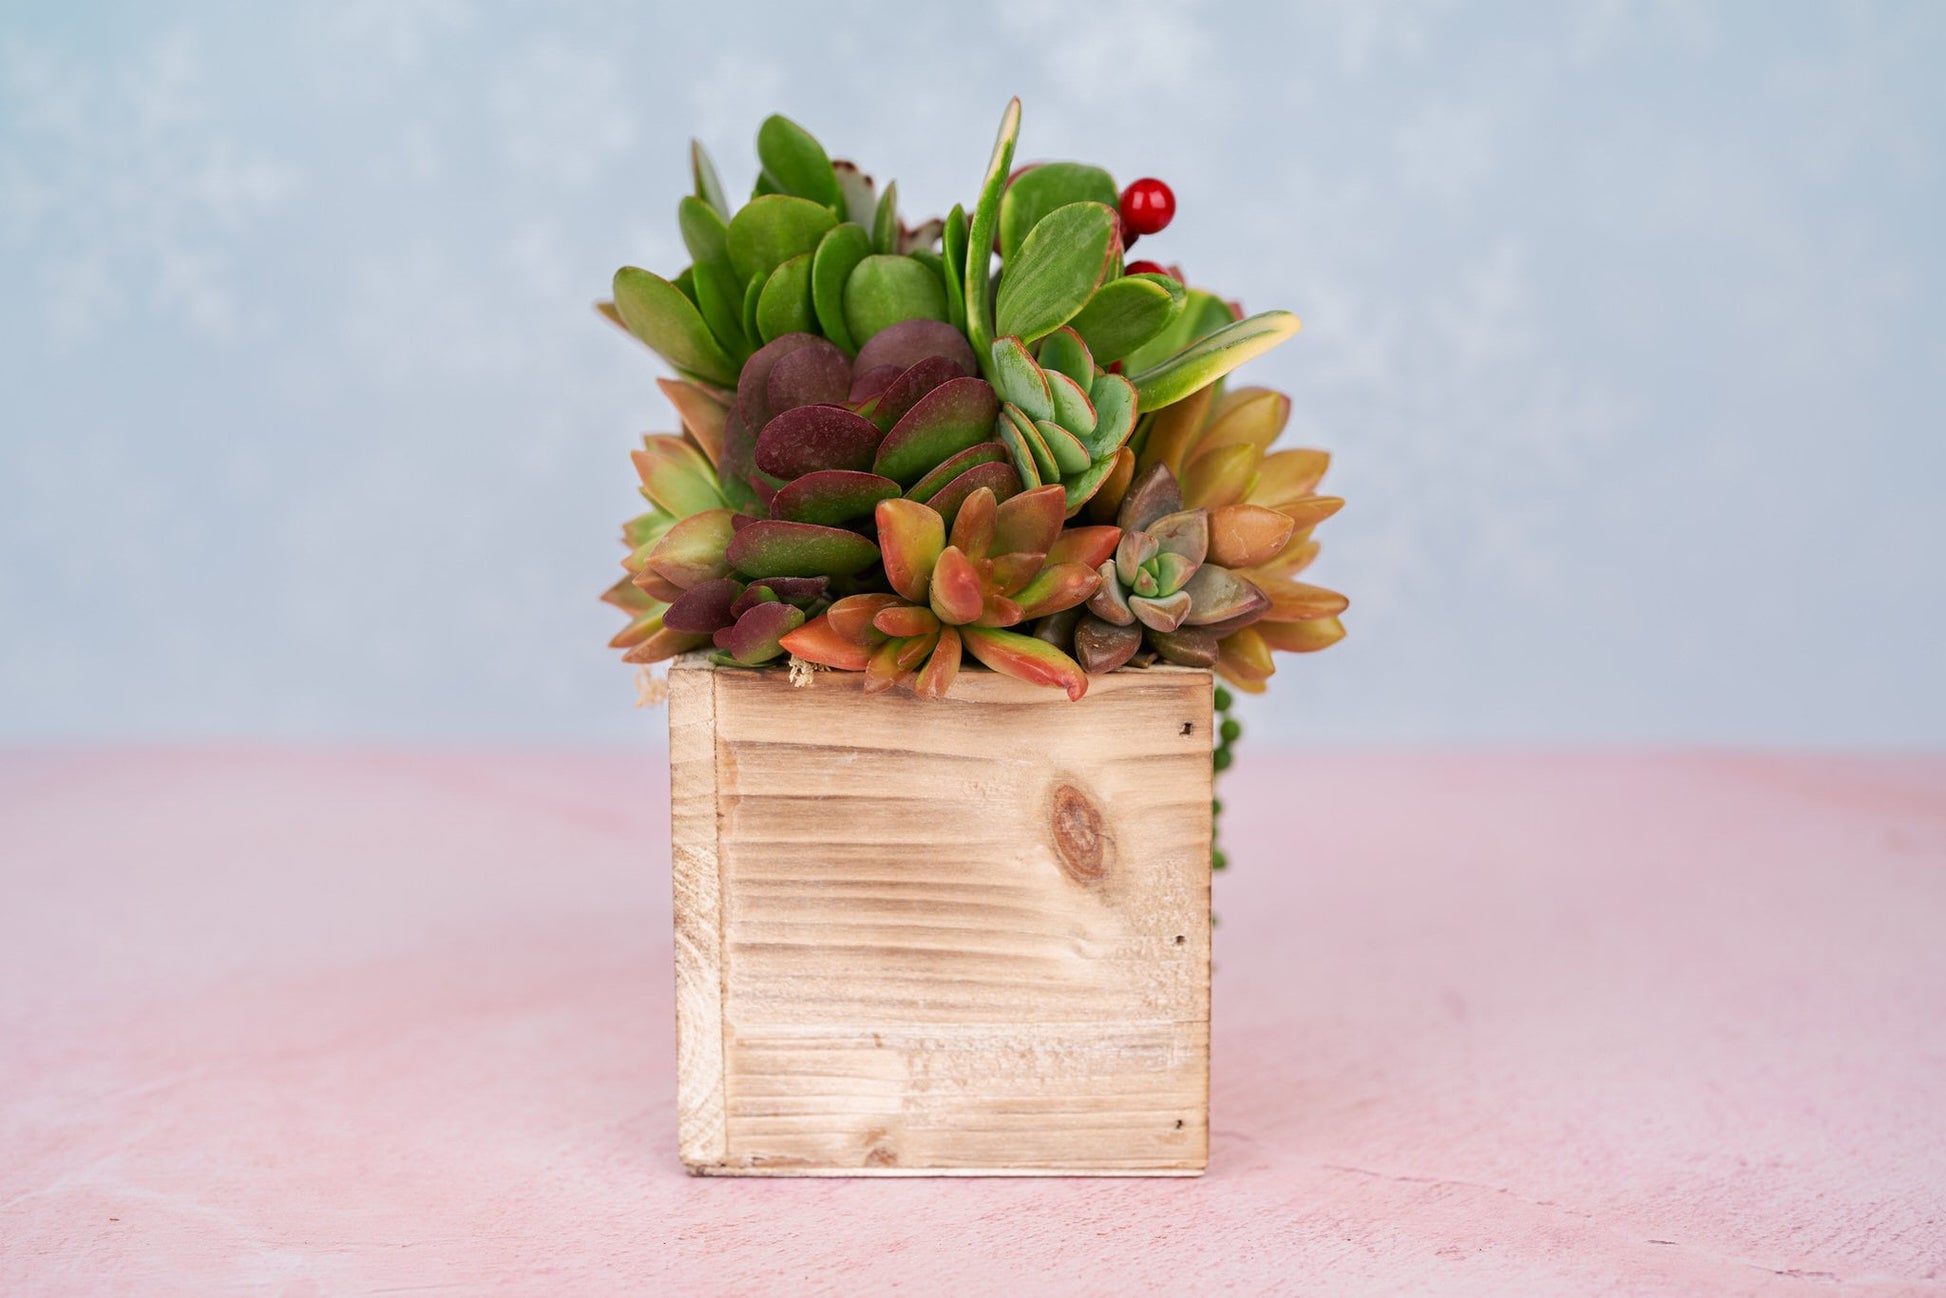 Holiday Festive Wood Rustic Succulent Arrangement with Christmas Decorations: Winter Holiday Centerpiece or Home Decor